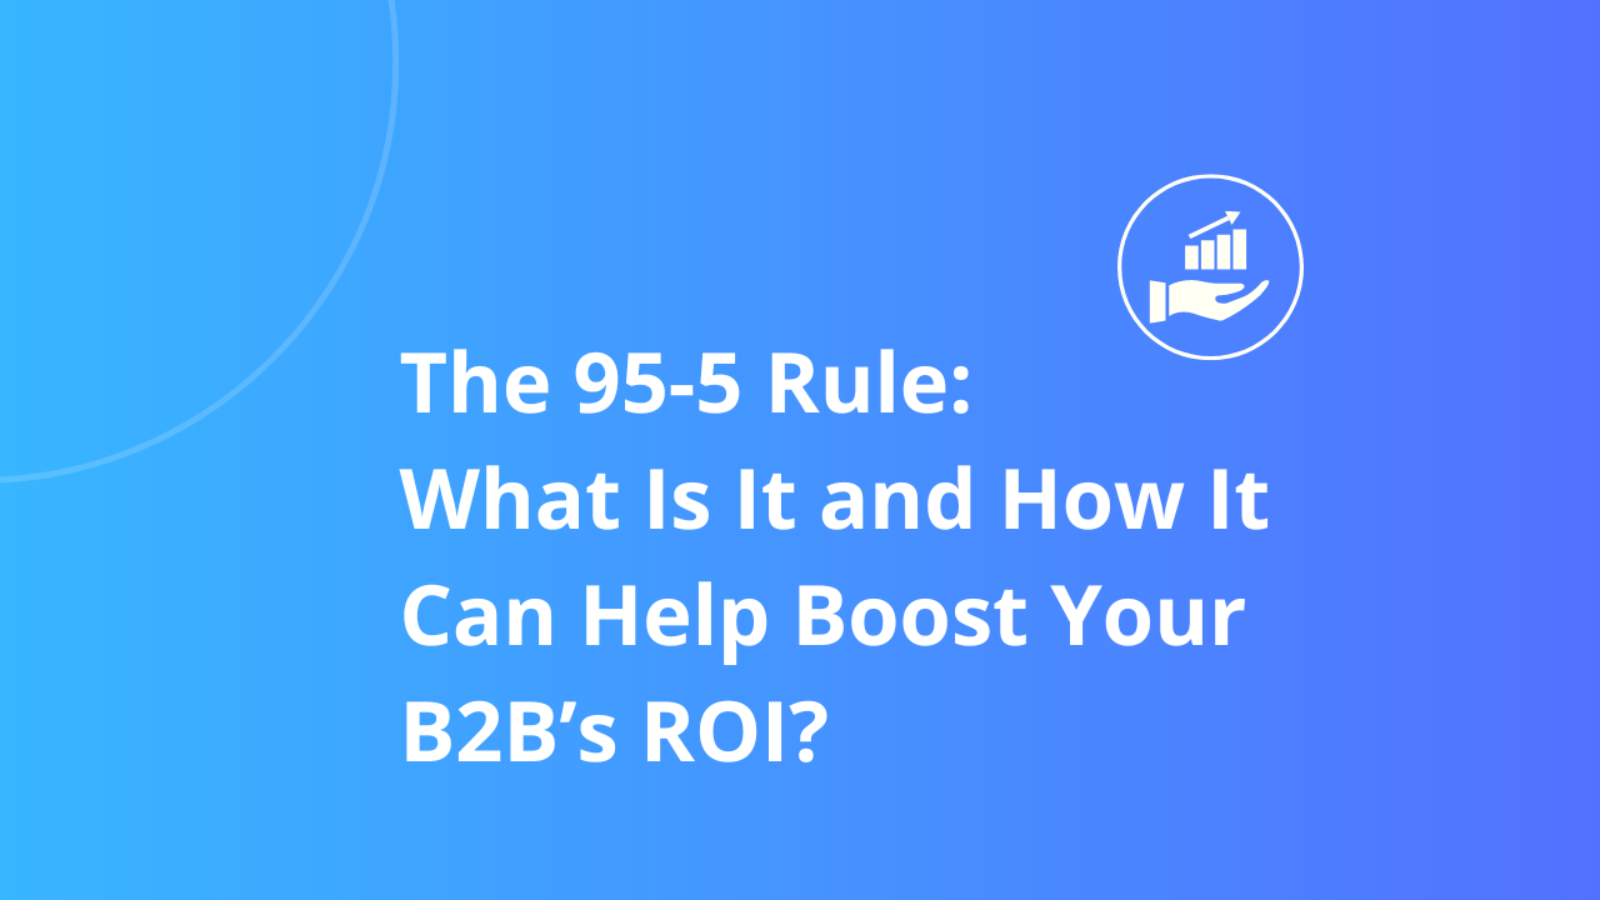 The 95-5 Rule: What Is It and How It Can Help Boost Your B2B’s ROI?